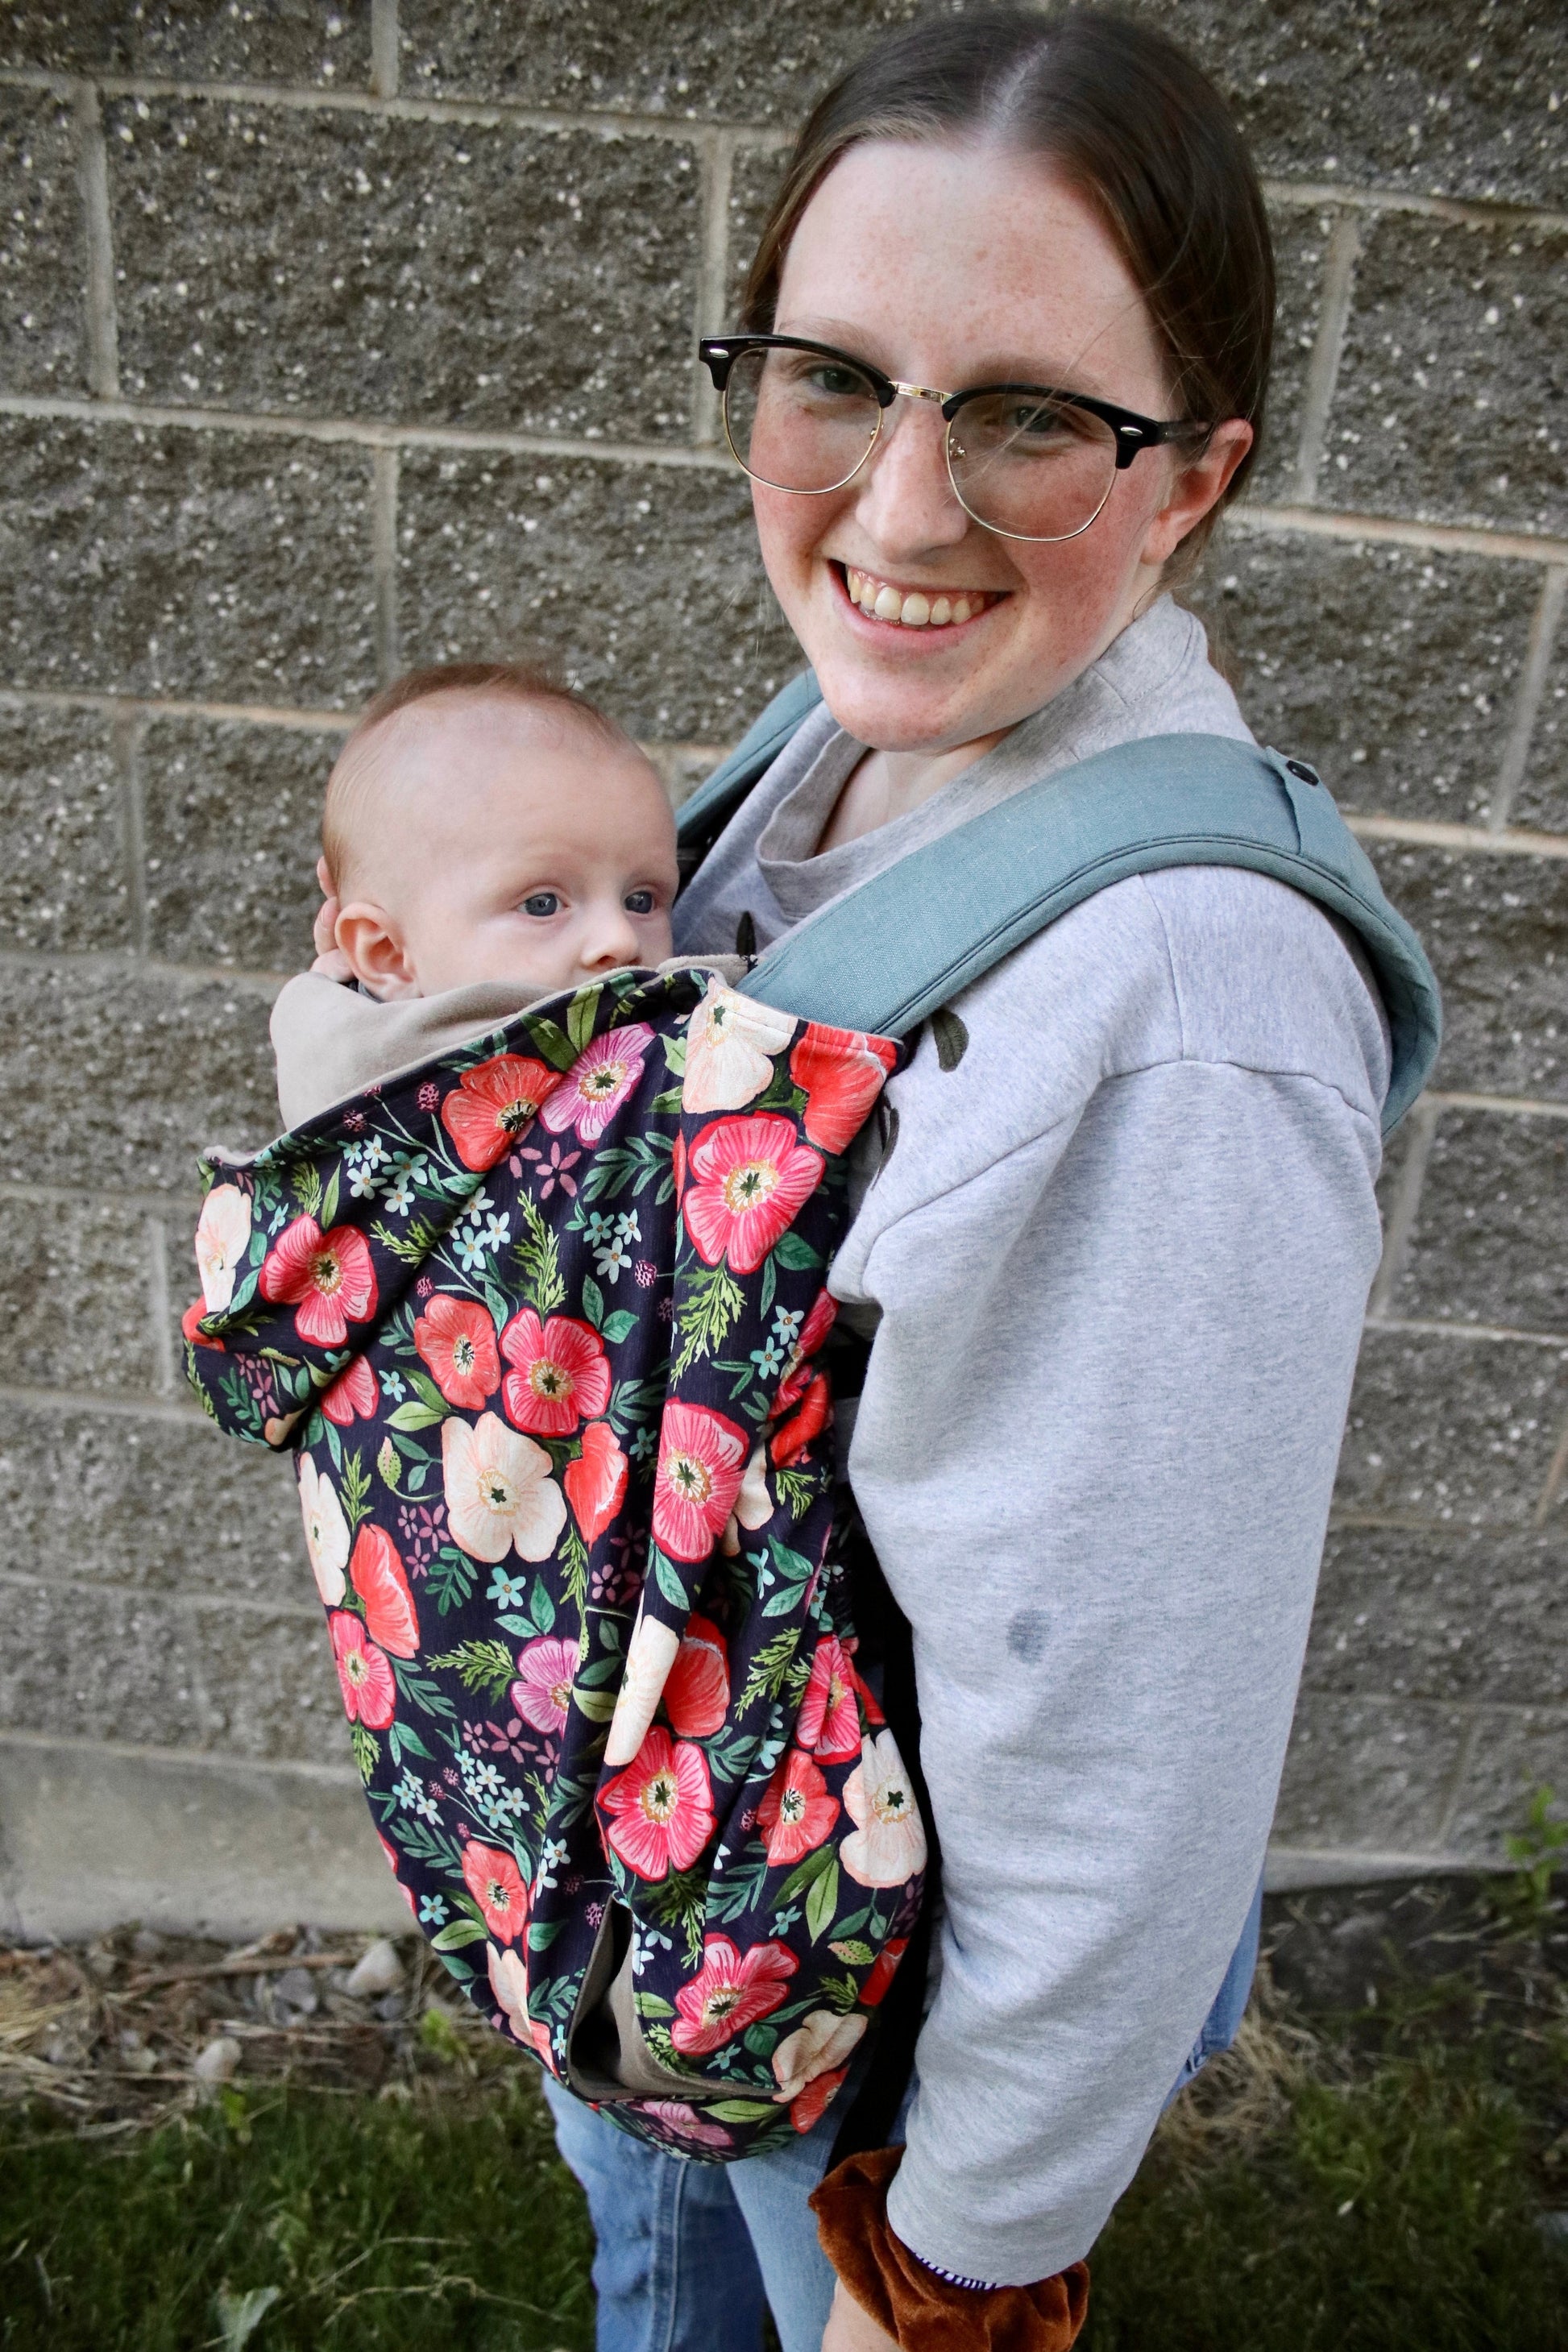 Rainbow Rows - Luxe Carrier Cover - Timber Stitches